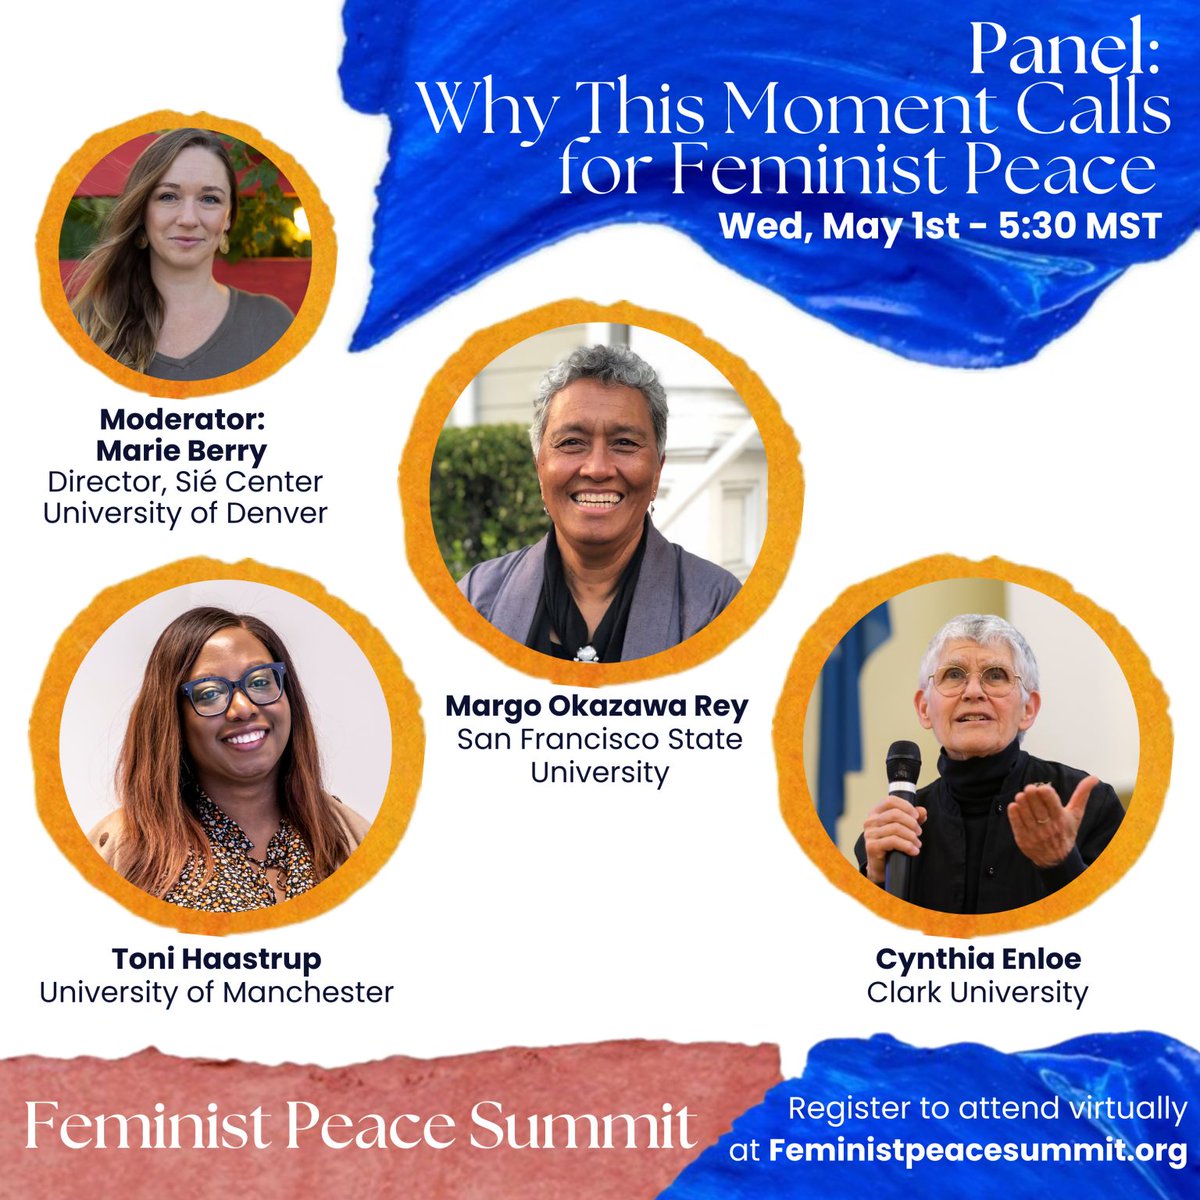 Our opening plenary is a dream 🥹 We are 1 week out from the Feminist Peace Summit! @MADREspeaks @ggjalliance @WomenCrossDMZ @sie_center